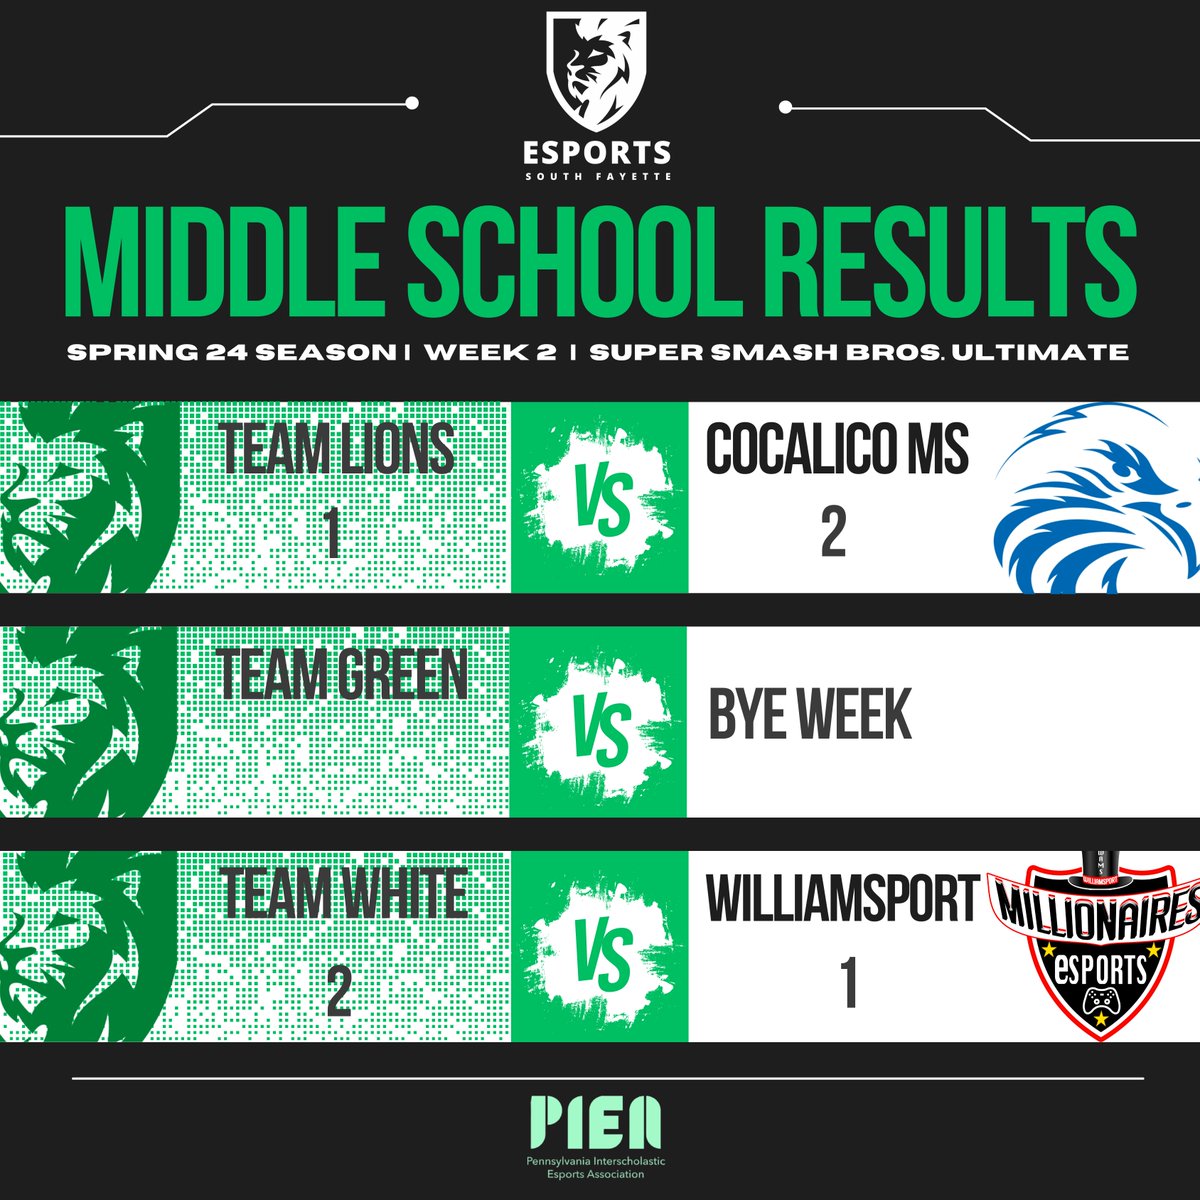 Week 2 Results for our SFMS Super Smash Teams. Looking forward to our Week 3 matches next Wednesday. #SFMSLionPride #SFLionPride